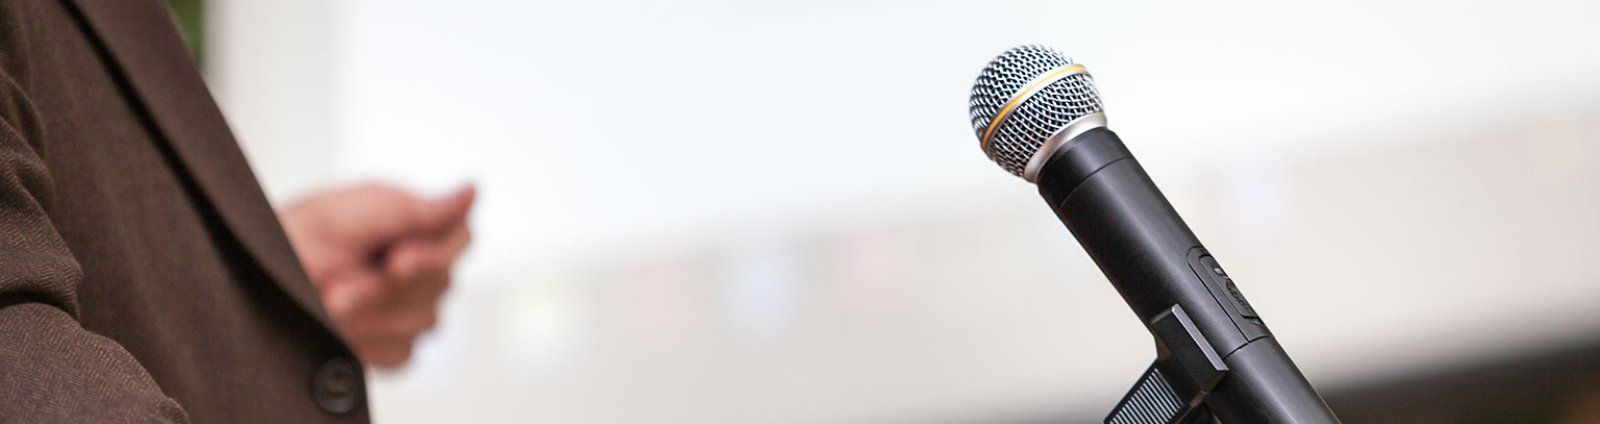 Close up of a person reaching for a microphone